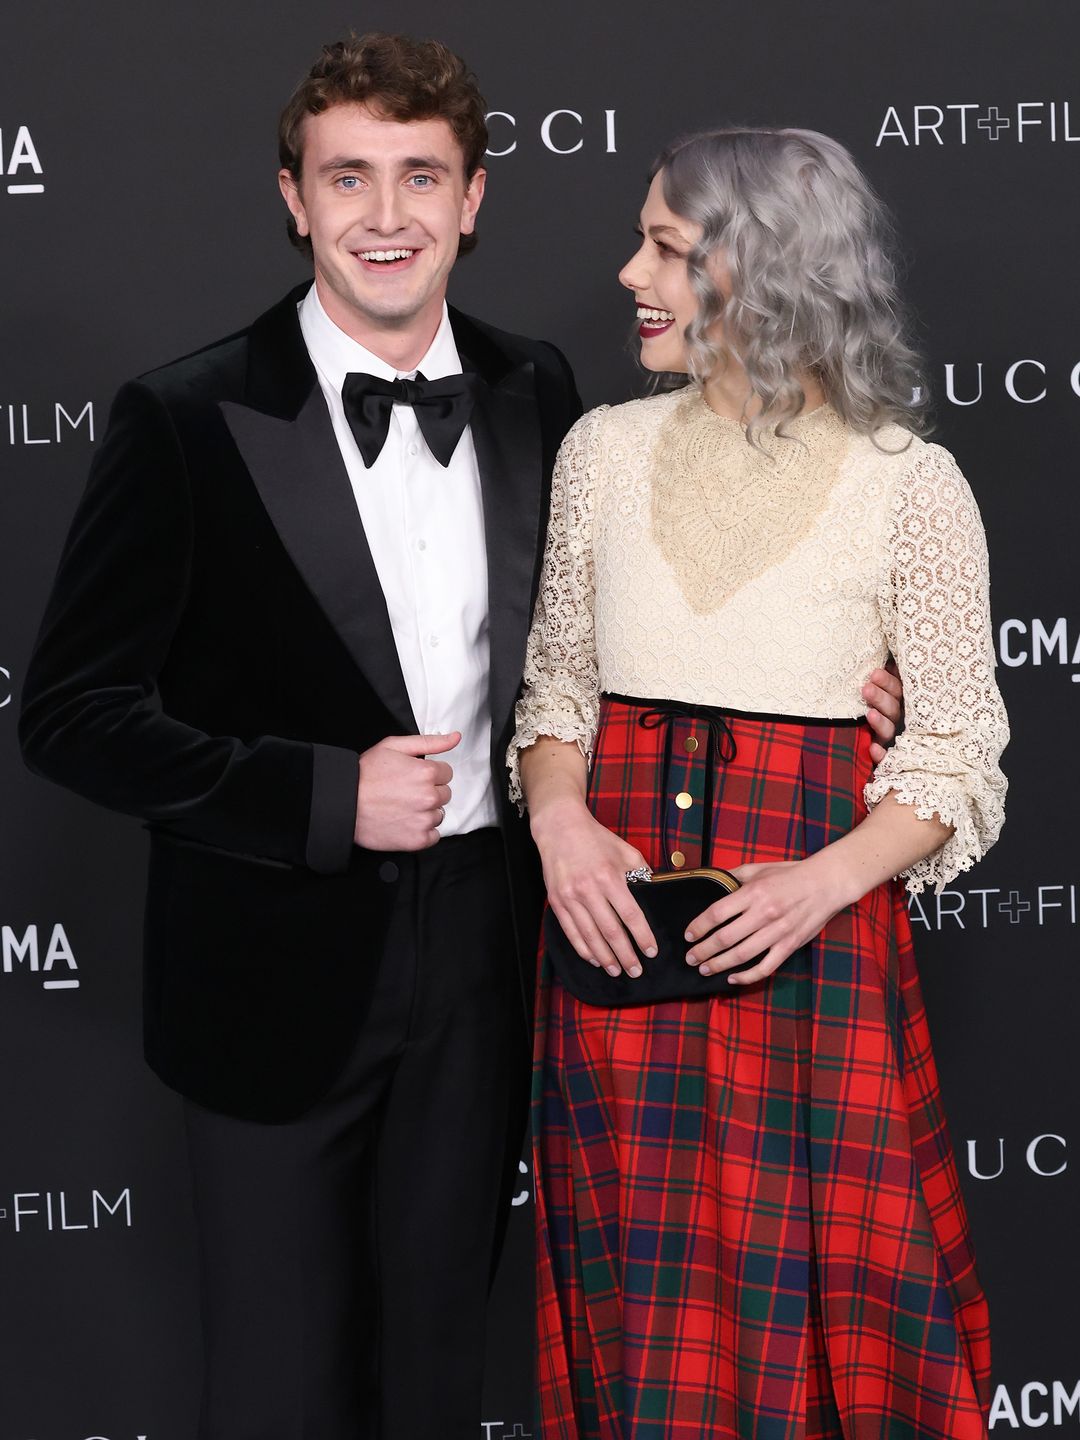 Paul Mescal and Phoebe Bridgers on the red carpet in 2021